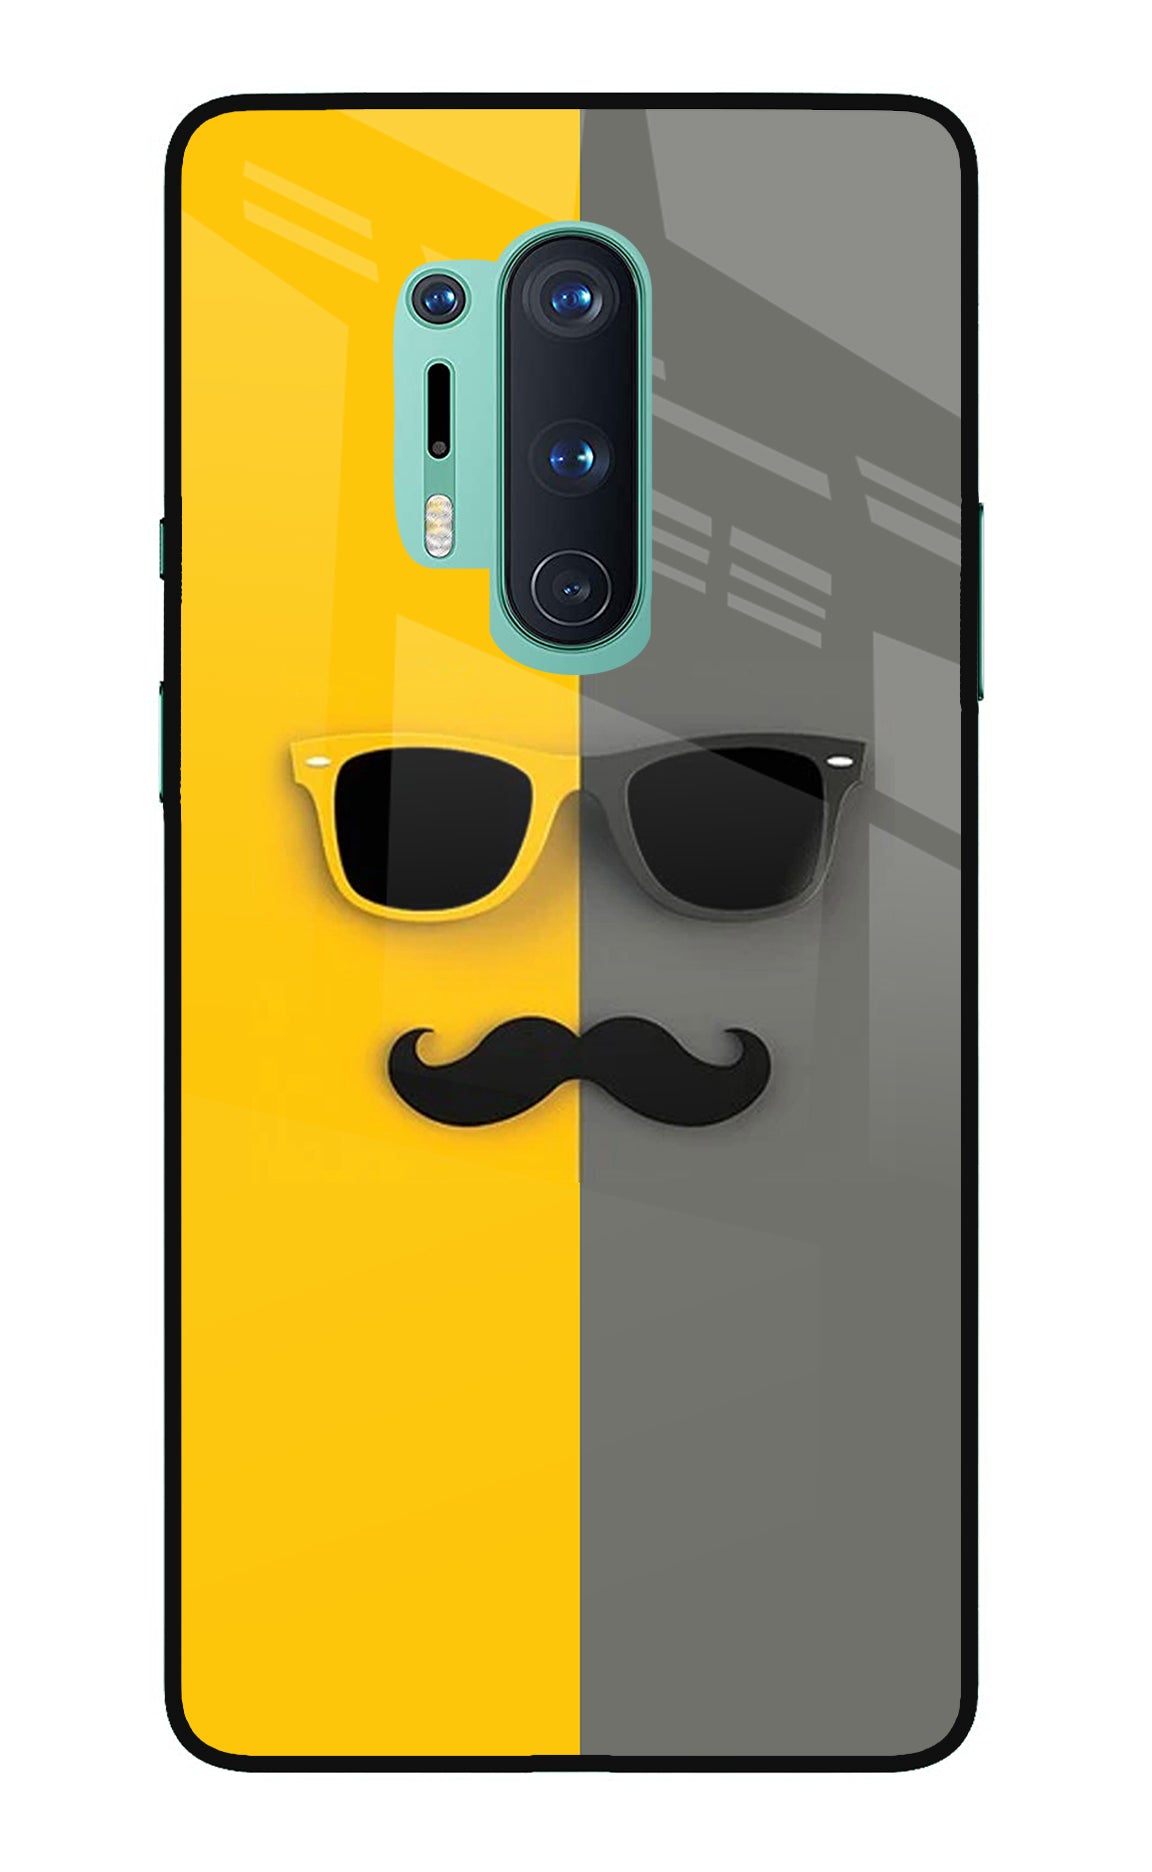 Sunglasses with Mustache Oneplus 8 Pro Back Cover